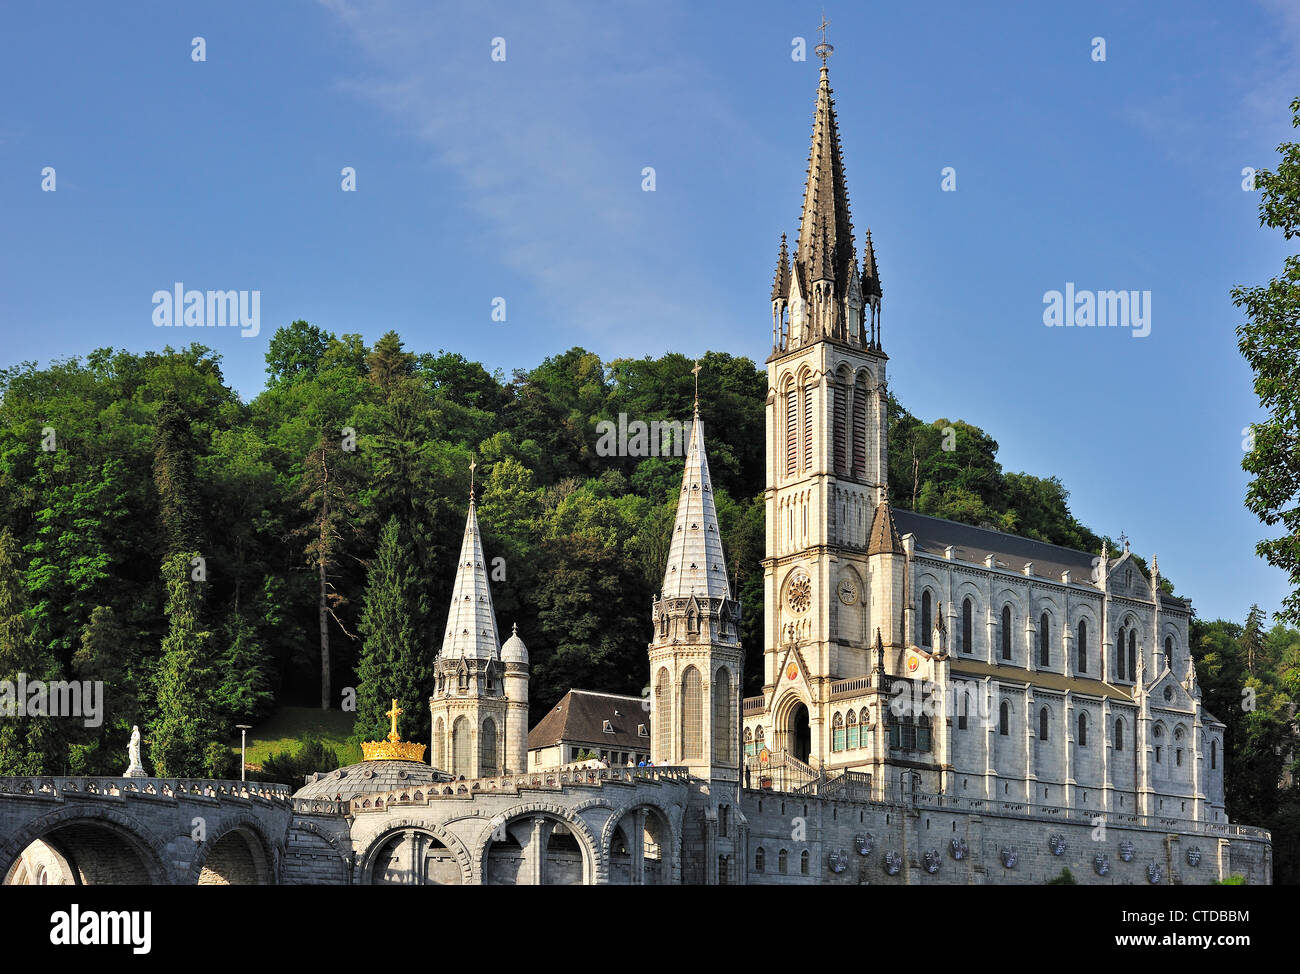 Basilica of our Lady of the Rosary / Notre Dame du Rosaire de Lourdes at the Sanctuary of Our Lady of Lourdes, Pyrenees, France Stock Photo